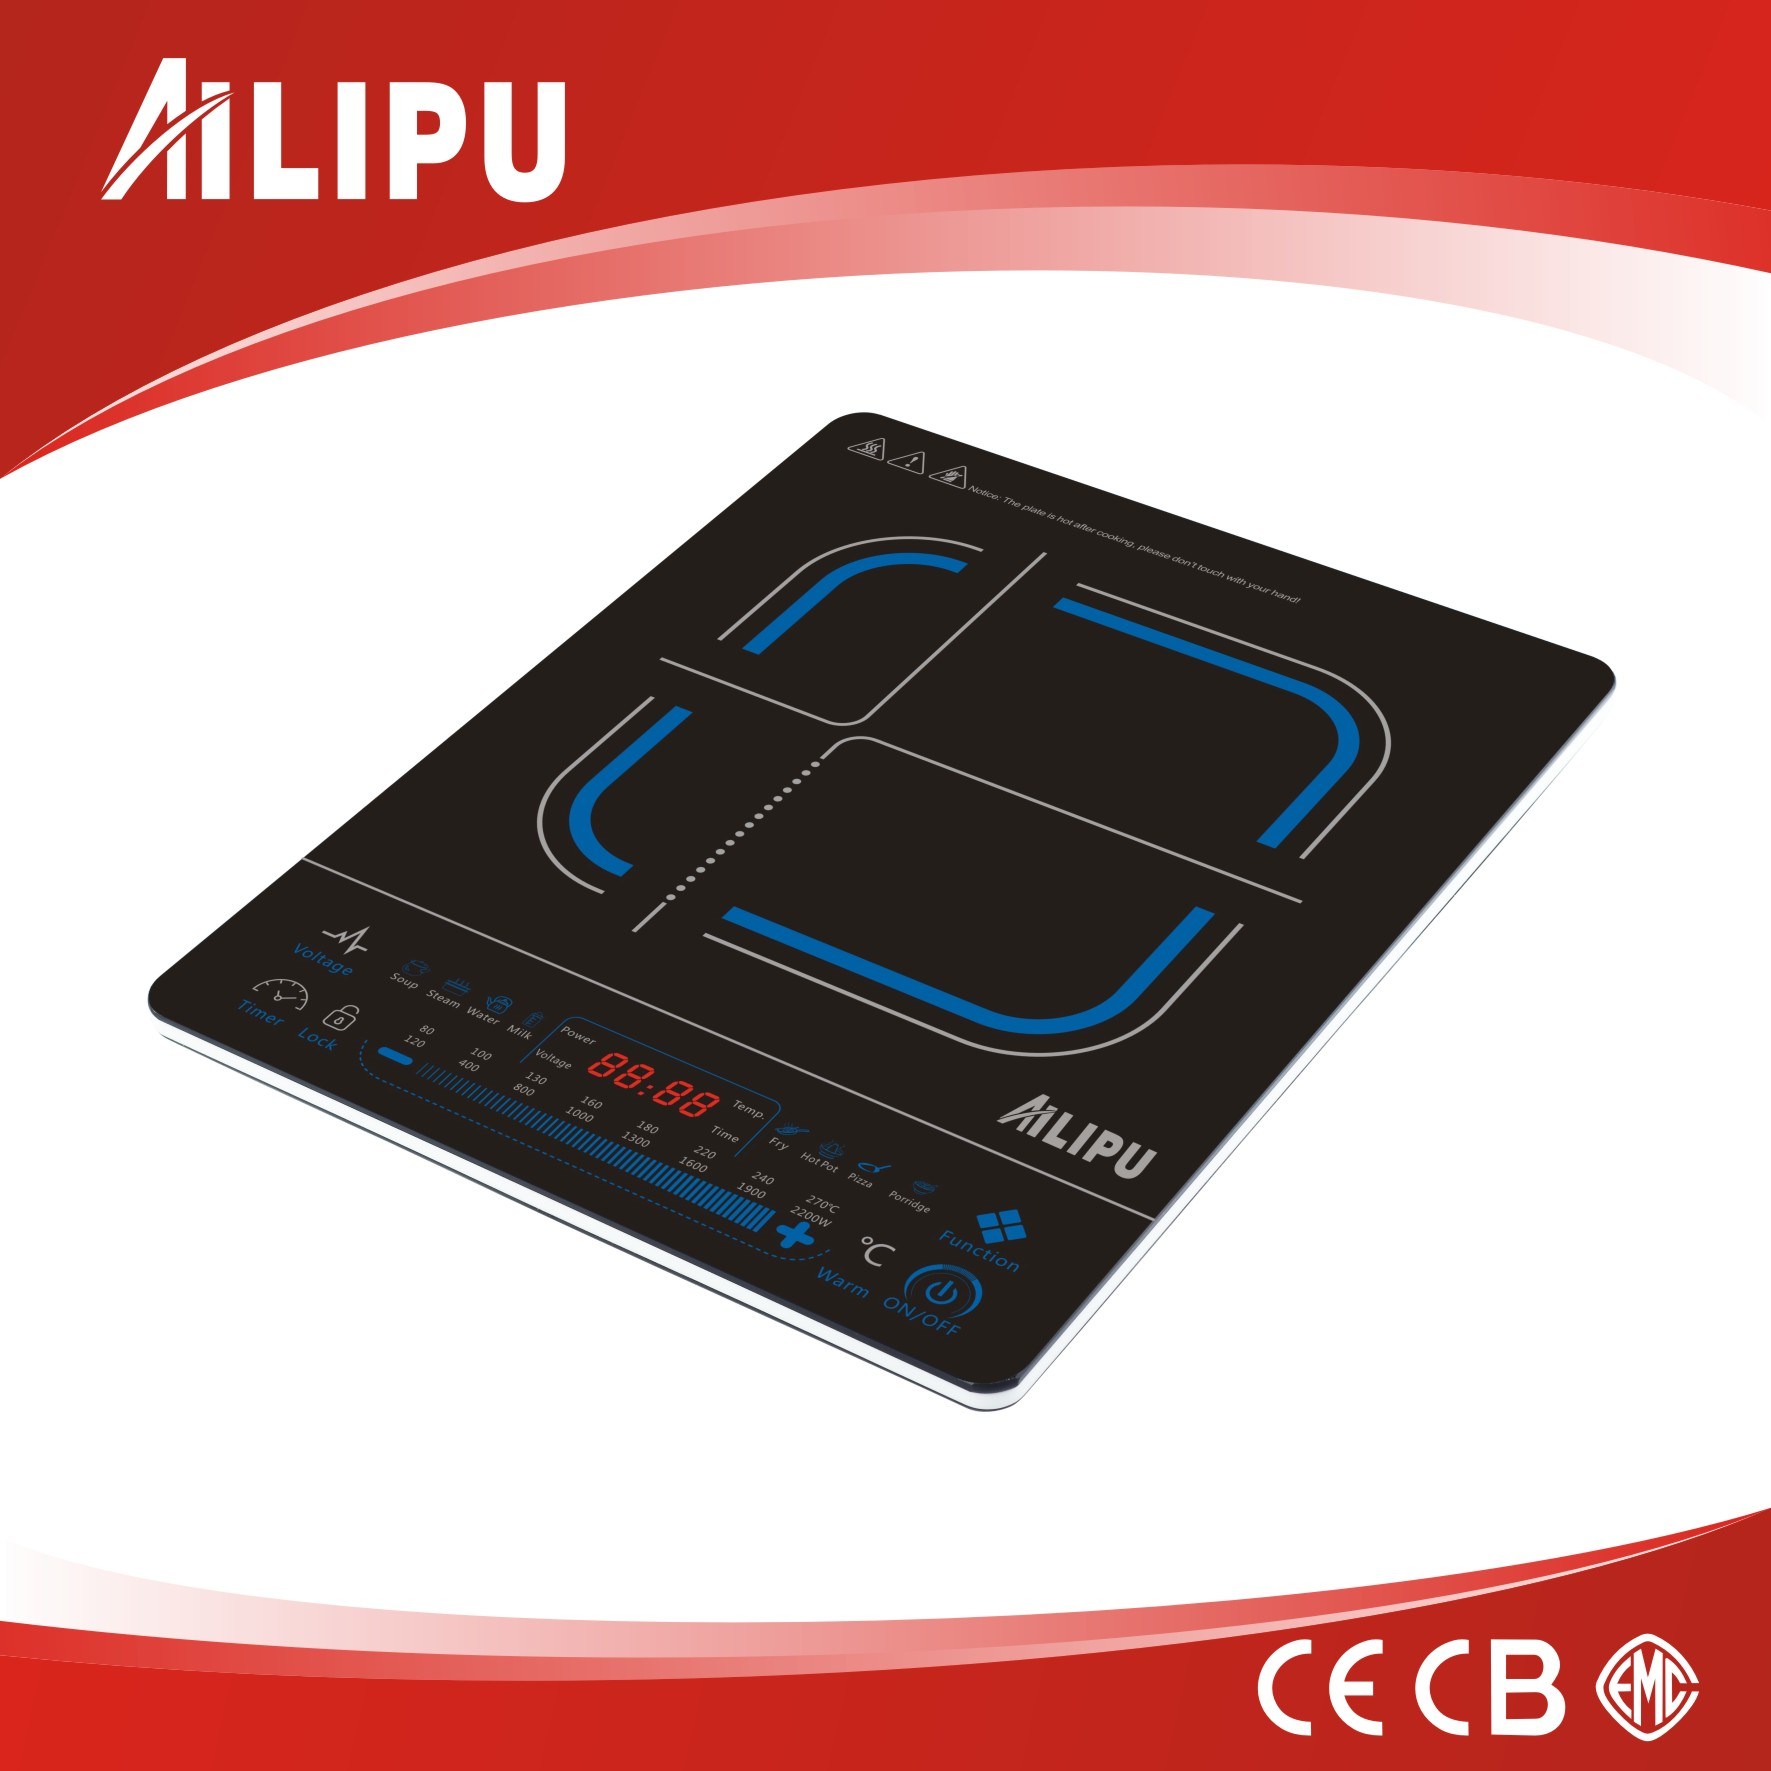 Manufacture of High Quality of Induction Cooker: Sensor Touch Control 2000W 220V 50Hz